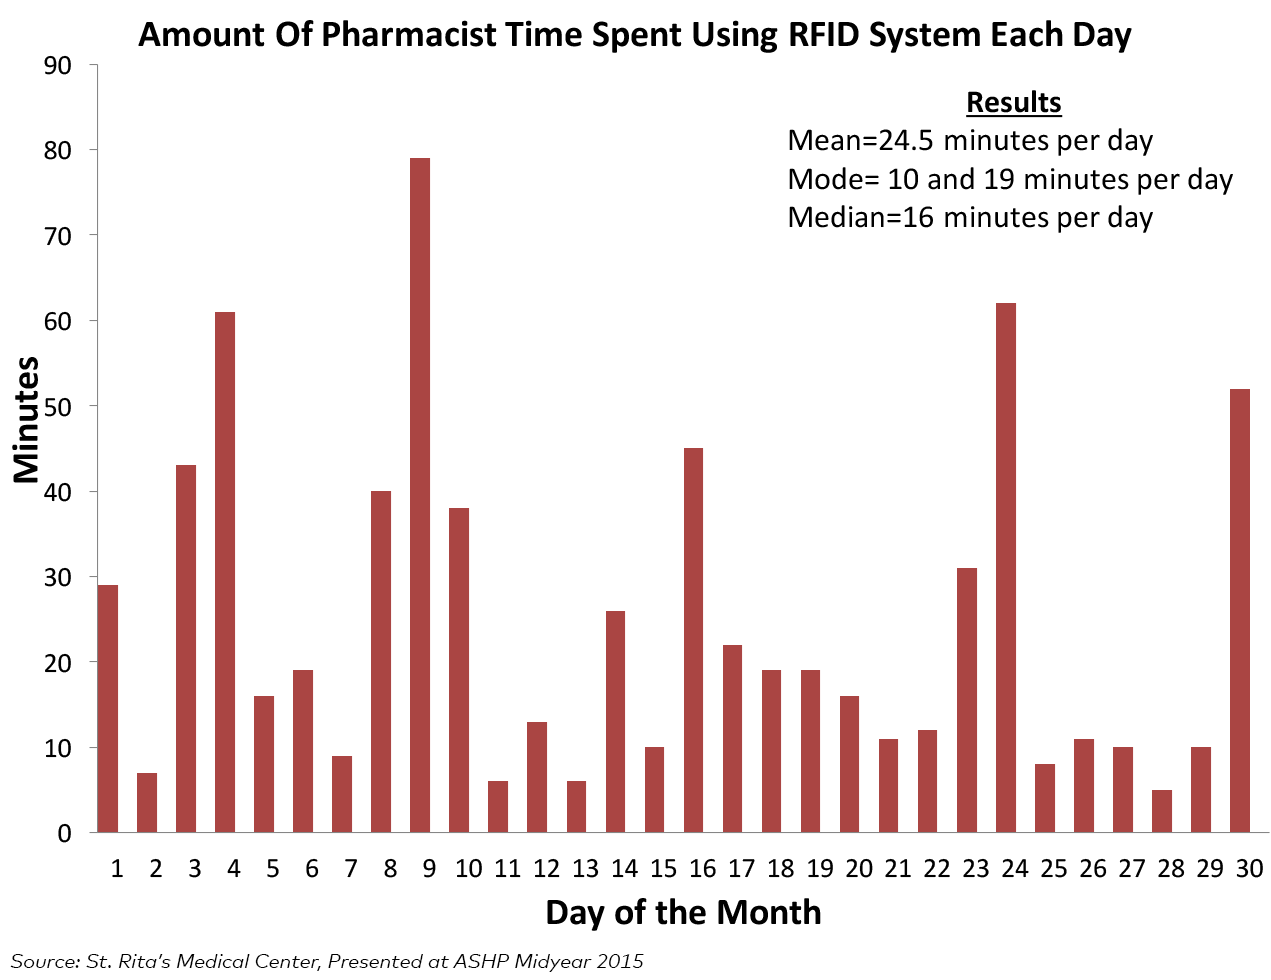 Amount of Pharmacist Time Spent Using RFID System Each Day